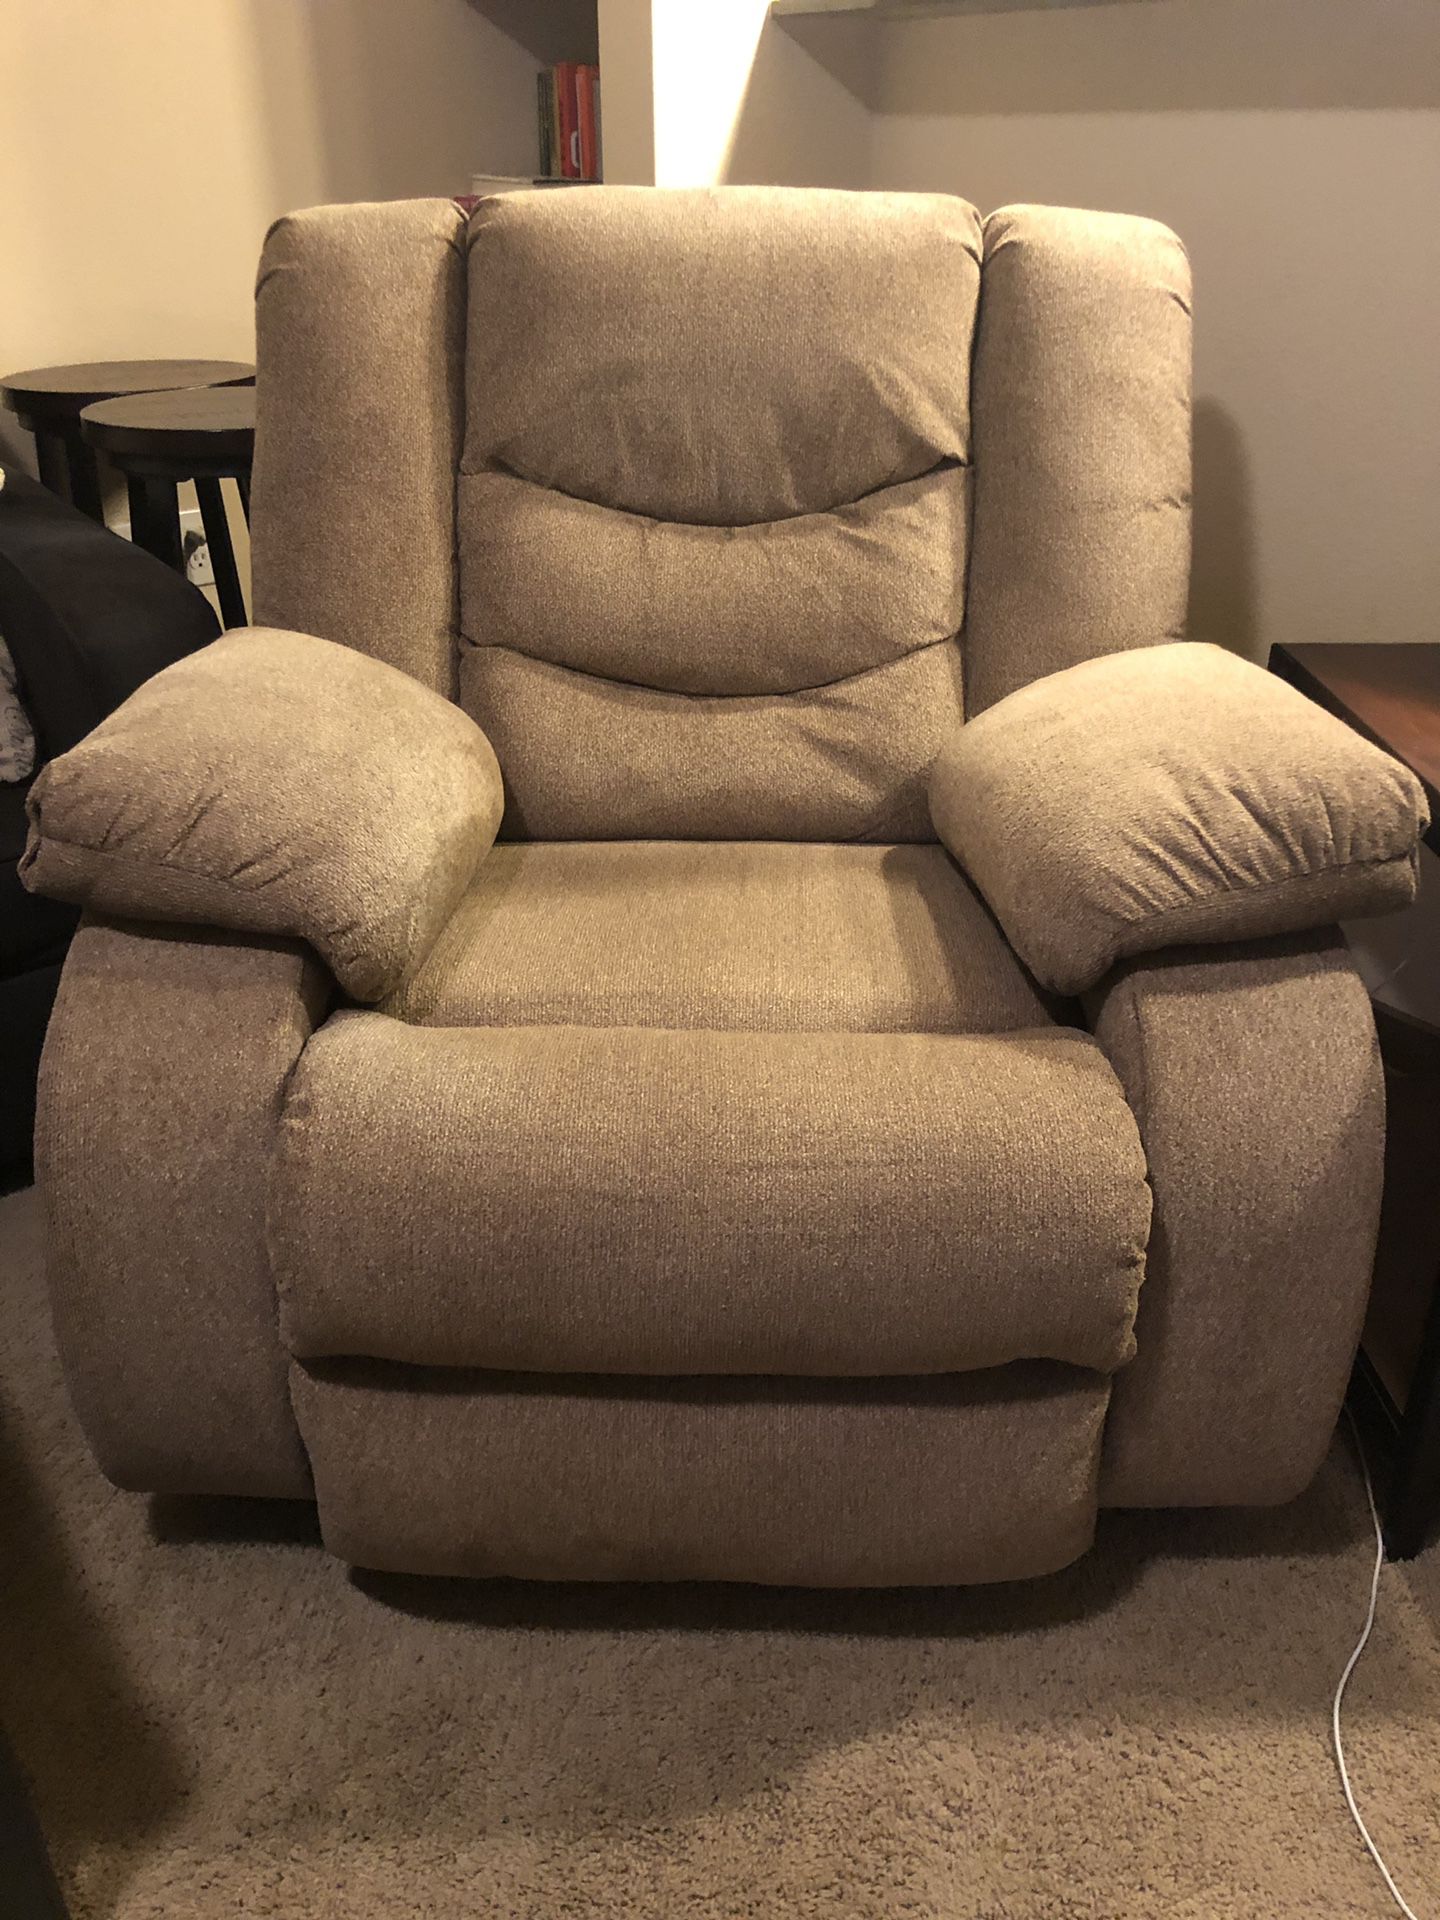 New Recliner (bought 3 weeks ago)